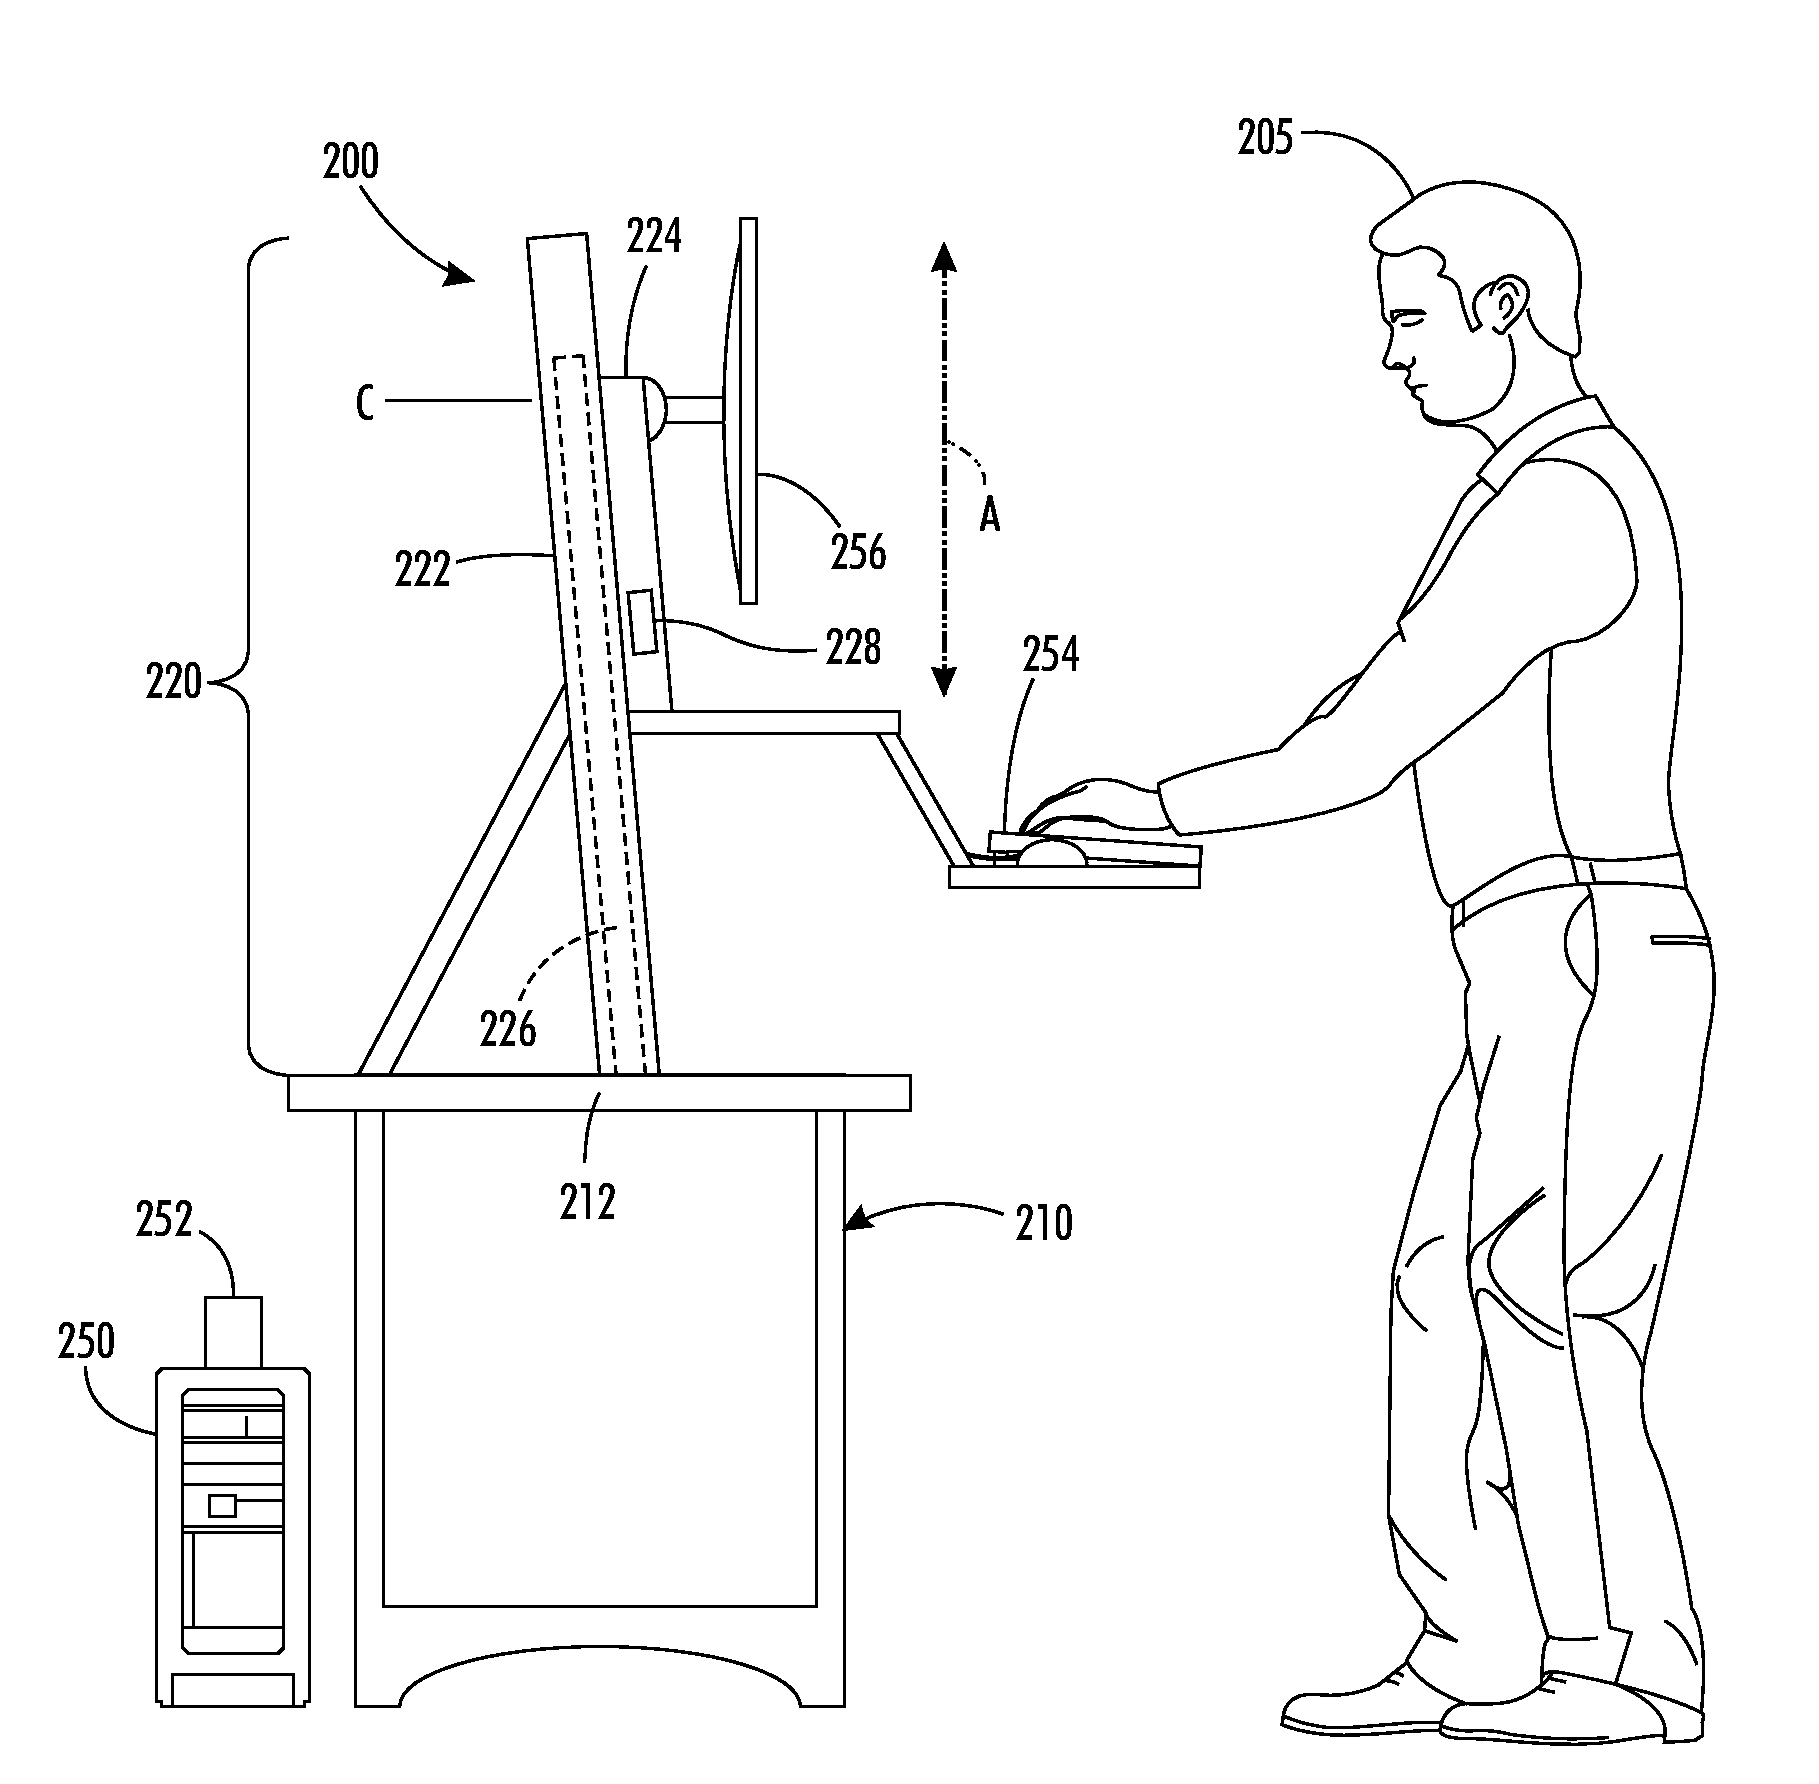 Systems and methods for implementing automated workstation elevation position tracking and control